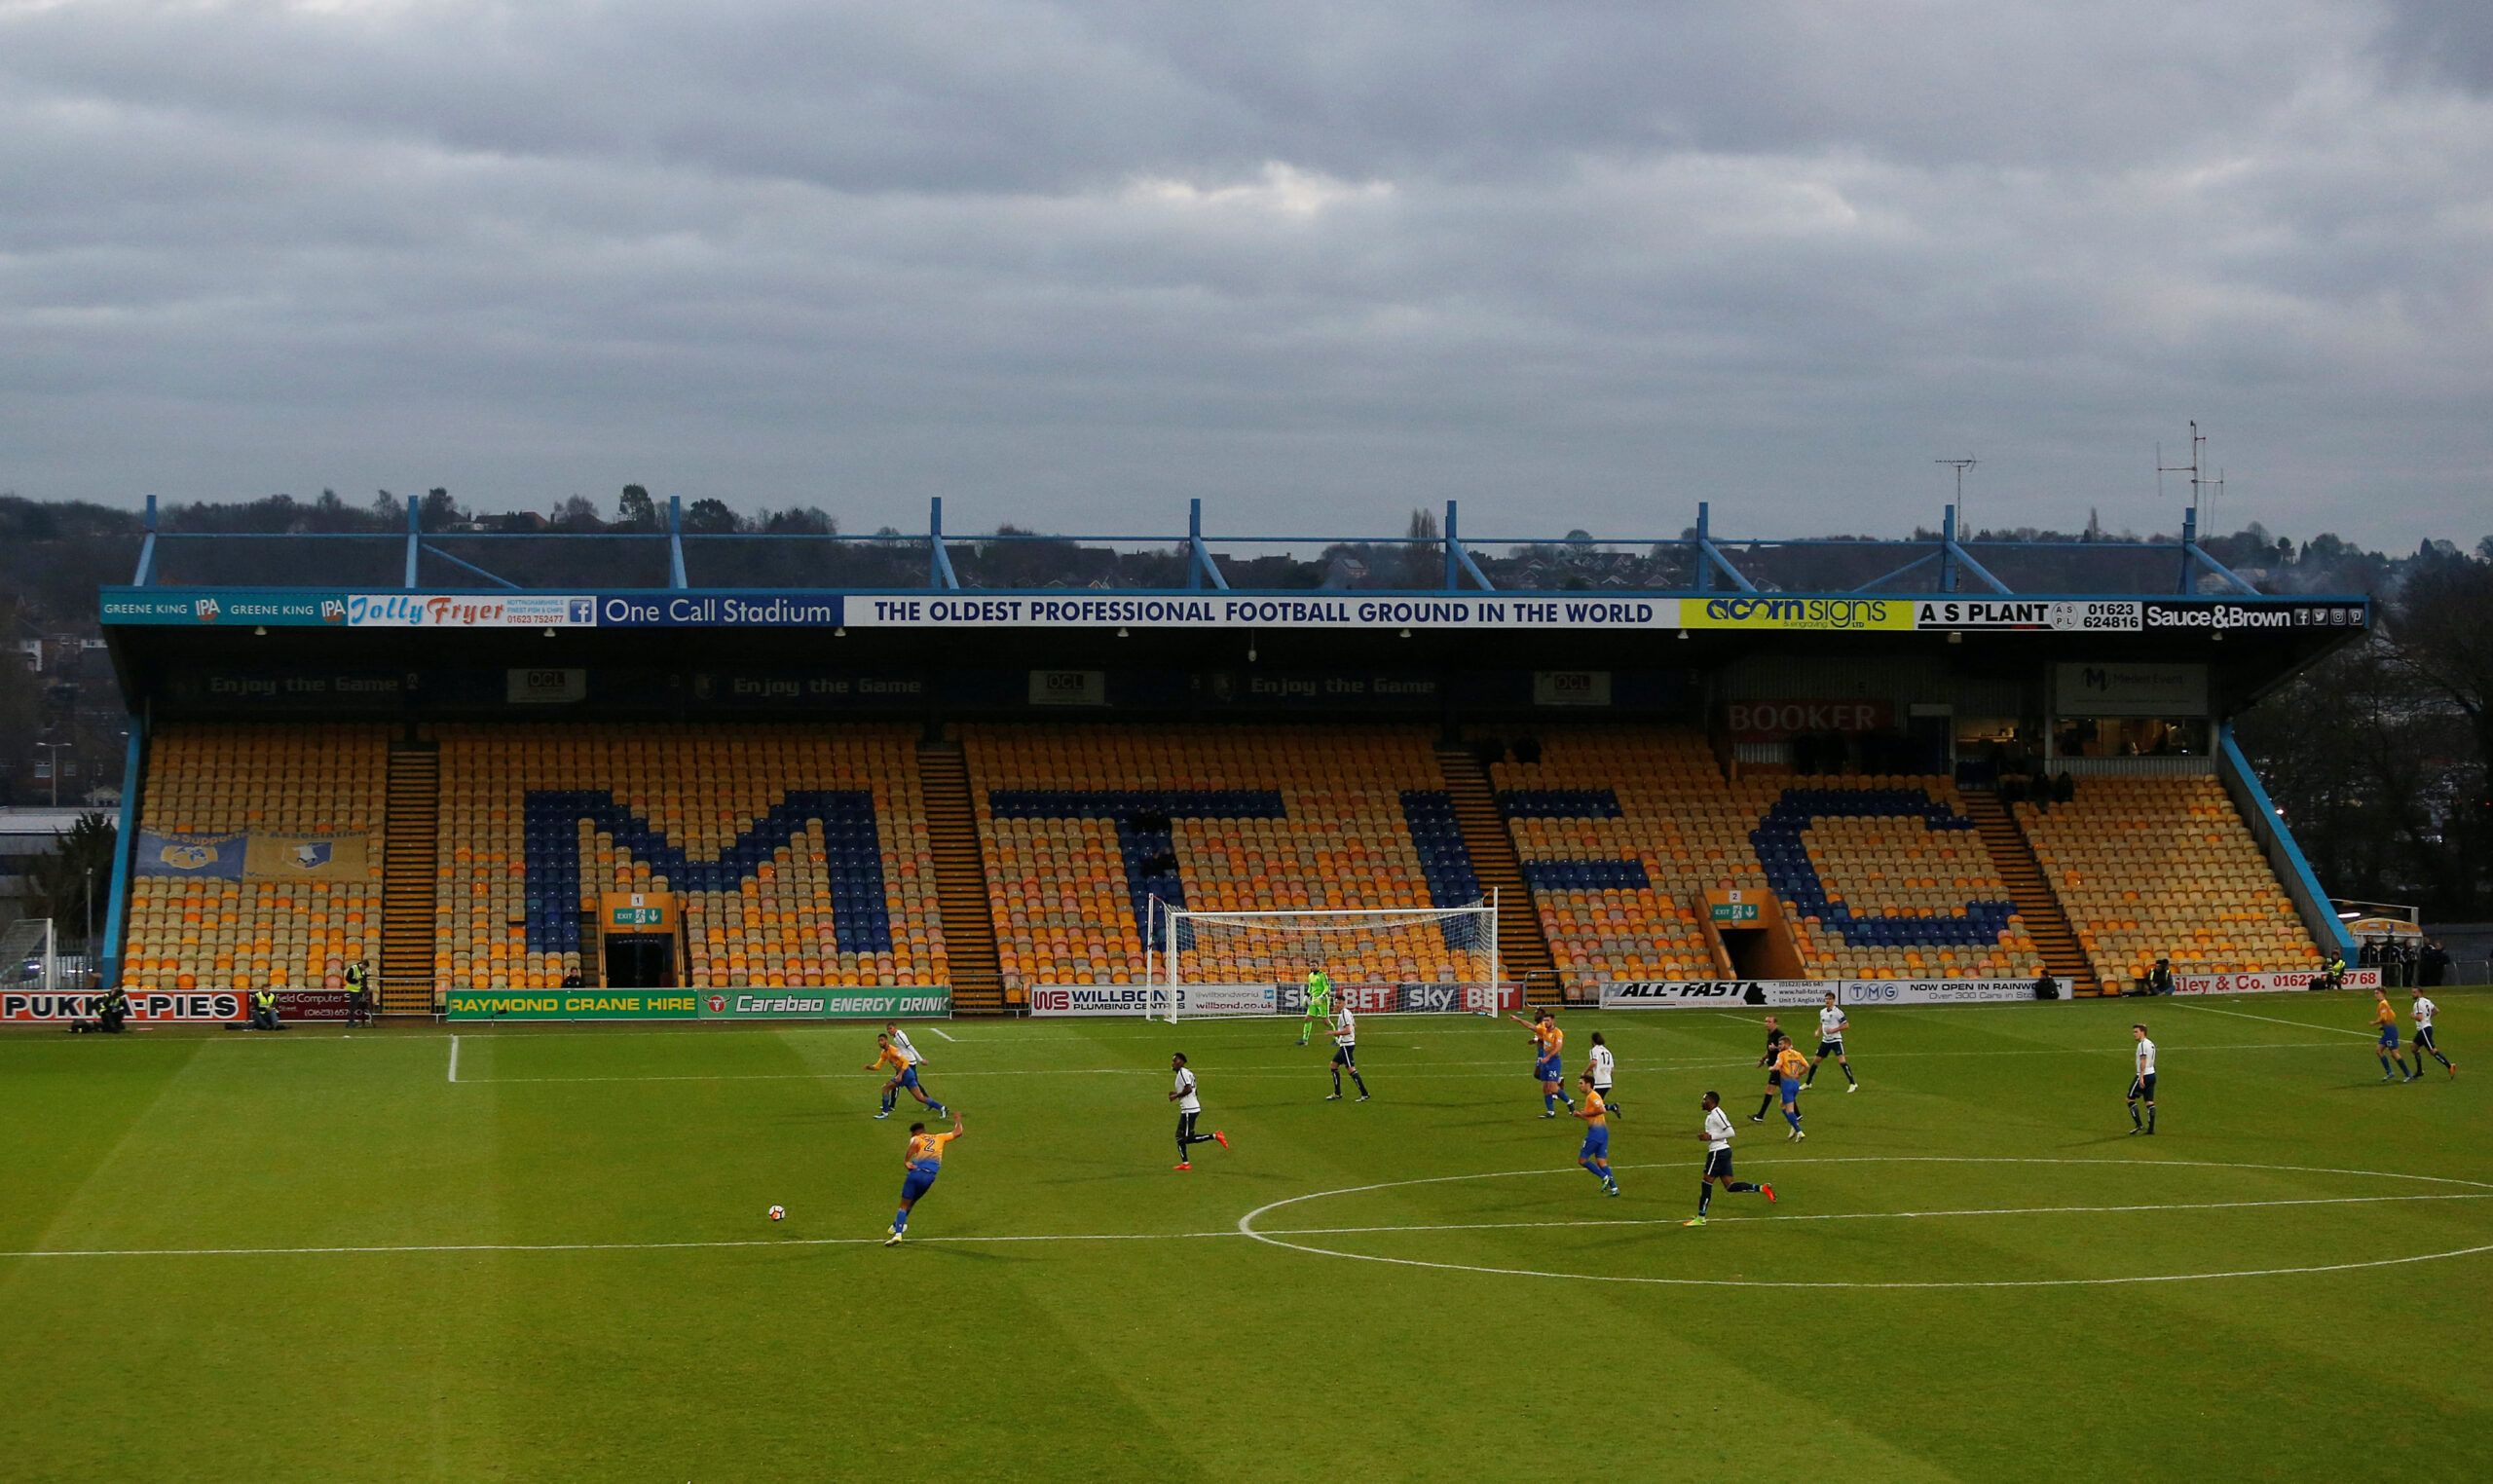 Soccer Football - FA Cup Second Round - Mansfield Town vs Guiseley - One Call Stadium, Mansfield, Britain - December 3, 2017   General view of an empty stand during the game   Action Images/Ed Sykes